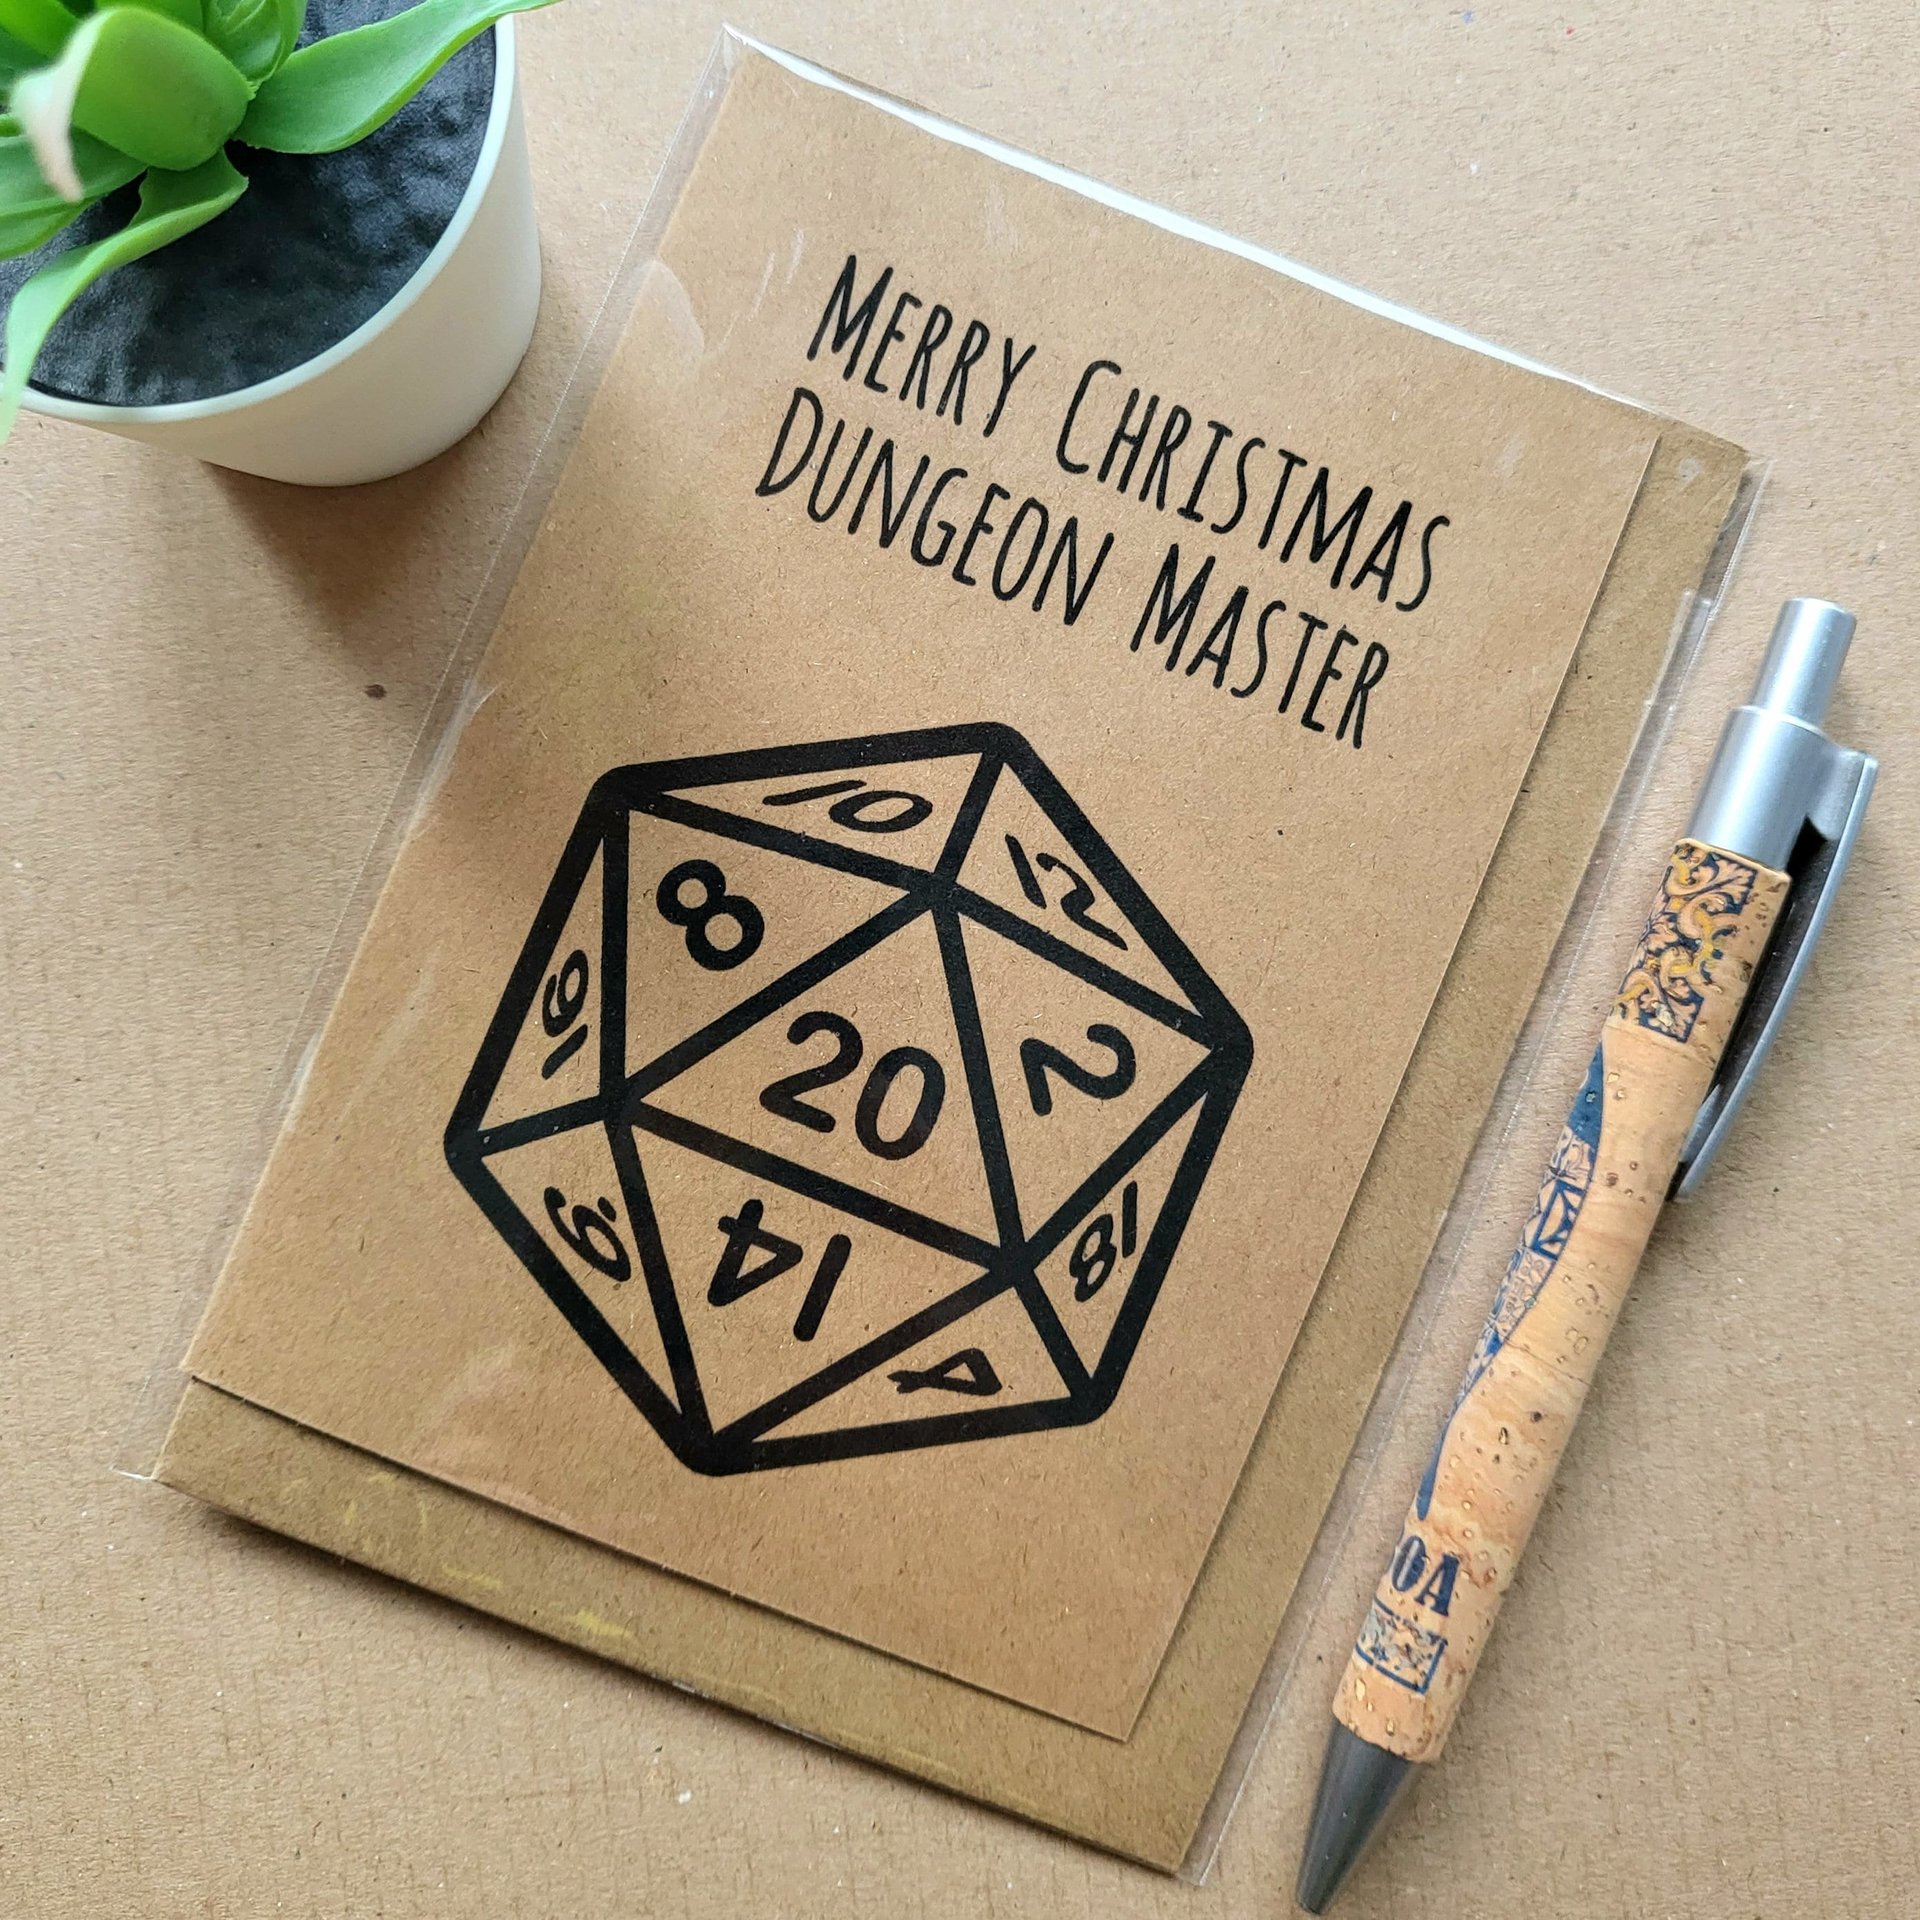 Dungeon Master Christmas card - Dungeons and Dragons